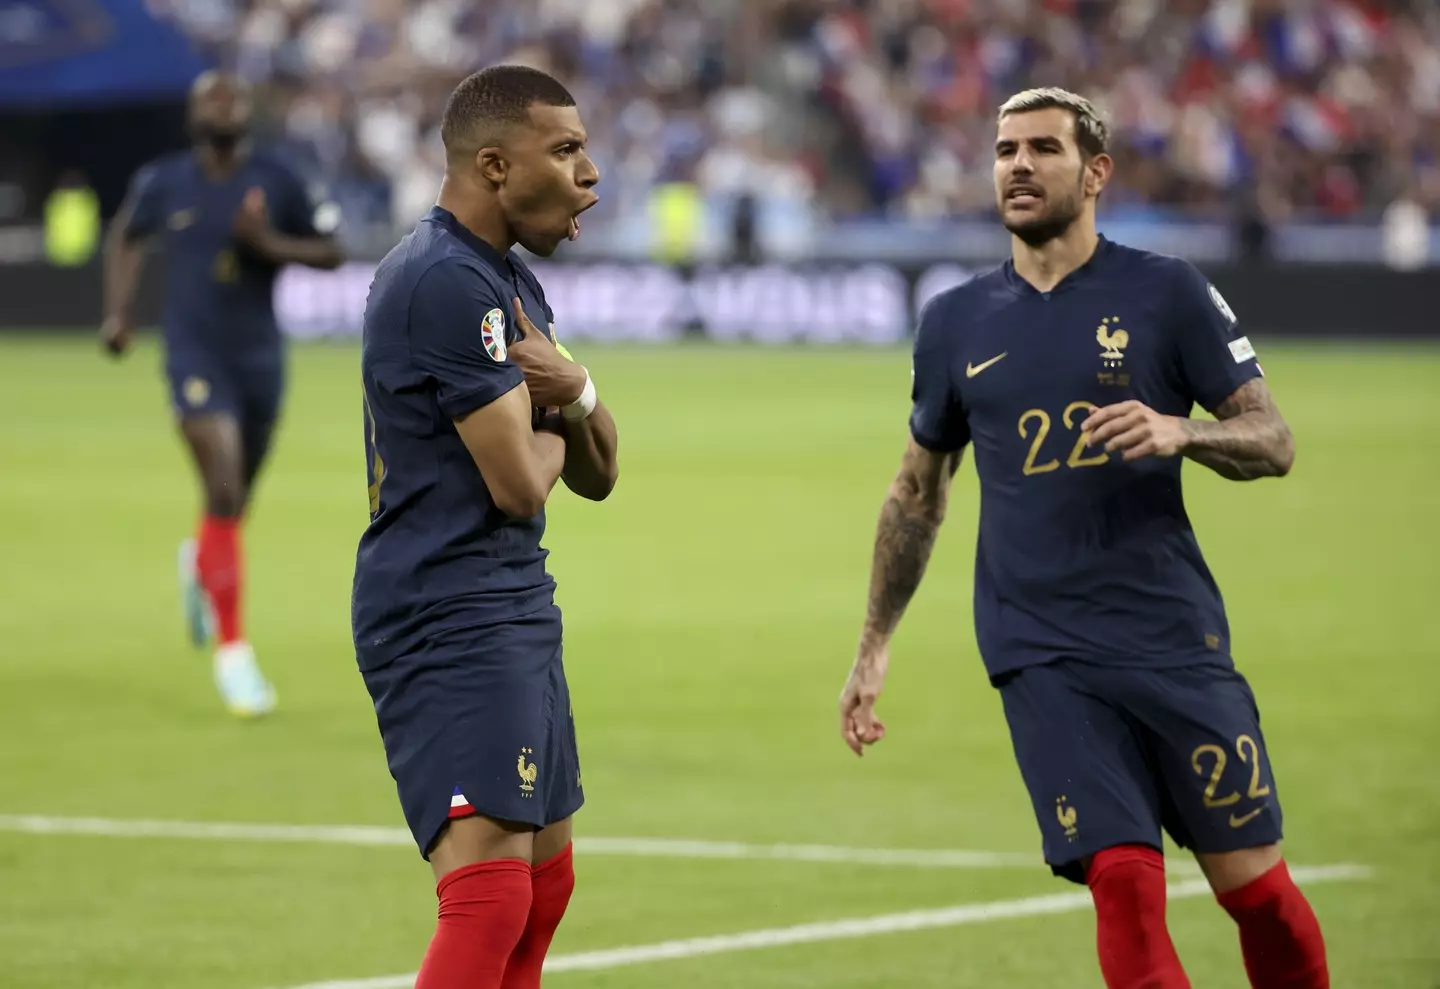 Kylian Mbappe was last seen on the football pitch for France in a Euros qualifier. (